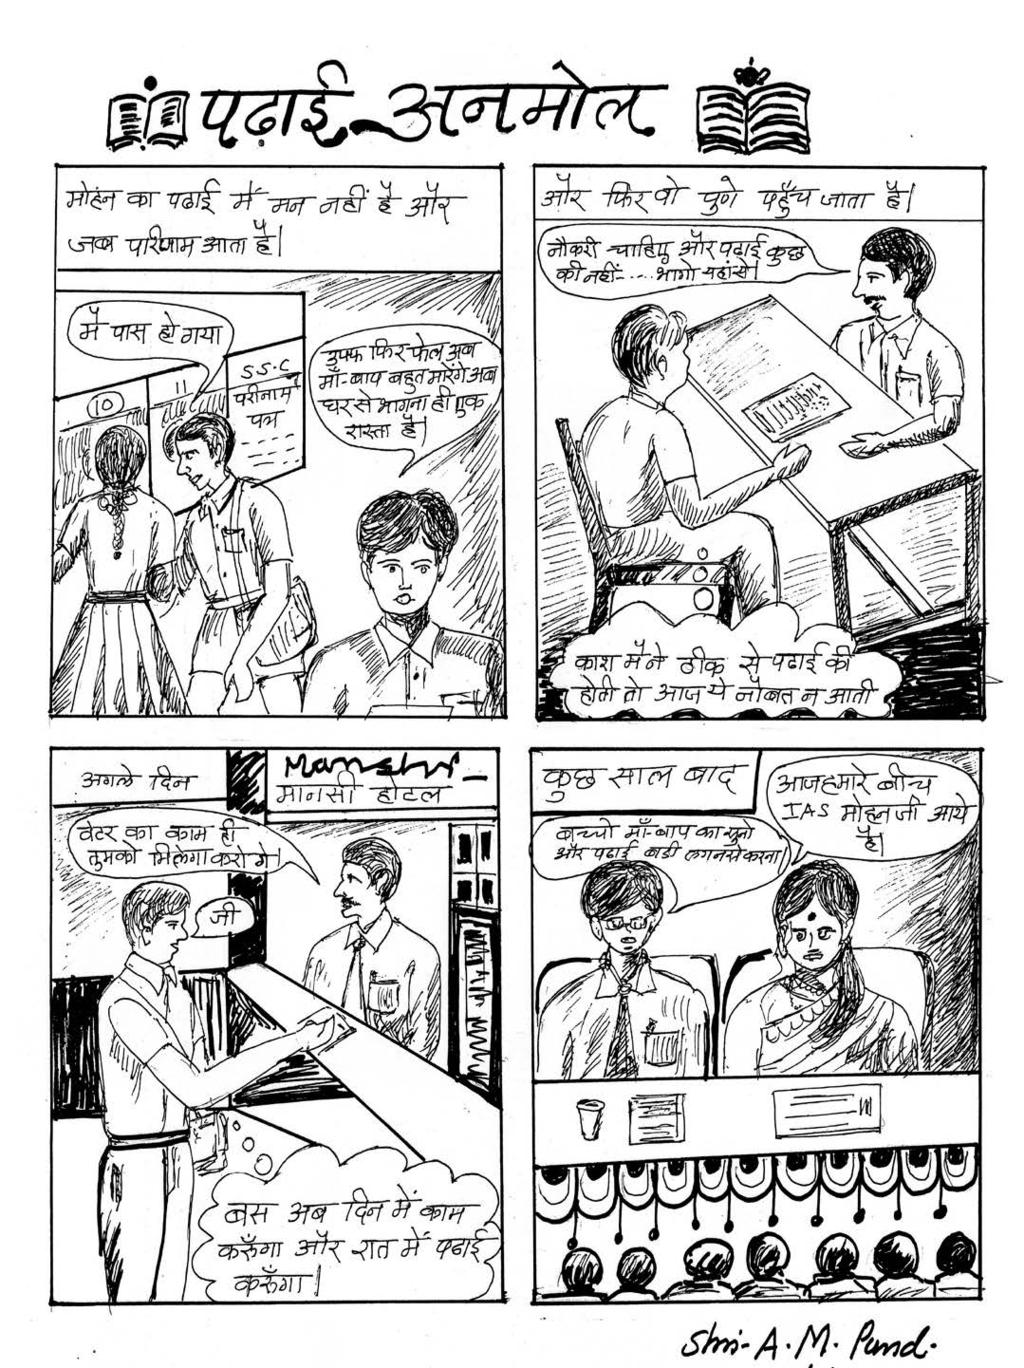 Importance of studies: Mohan does not like to study and fails his exams. He runs away from his house. He does not find a job anywhere since his studies are incomplete.